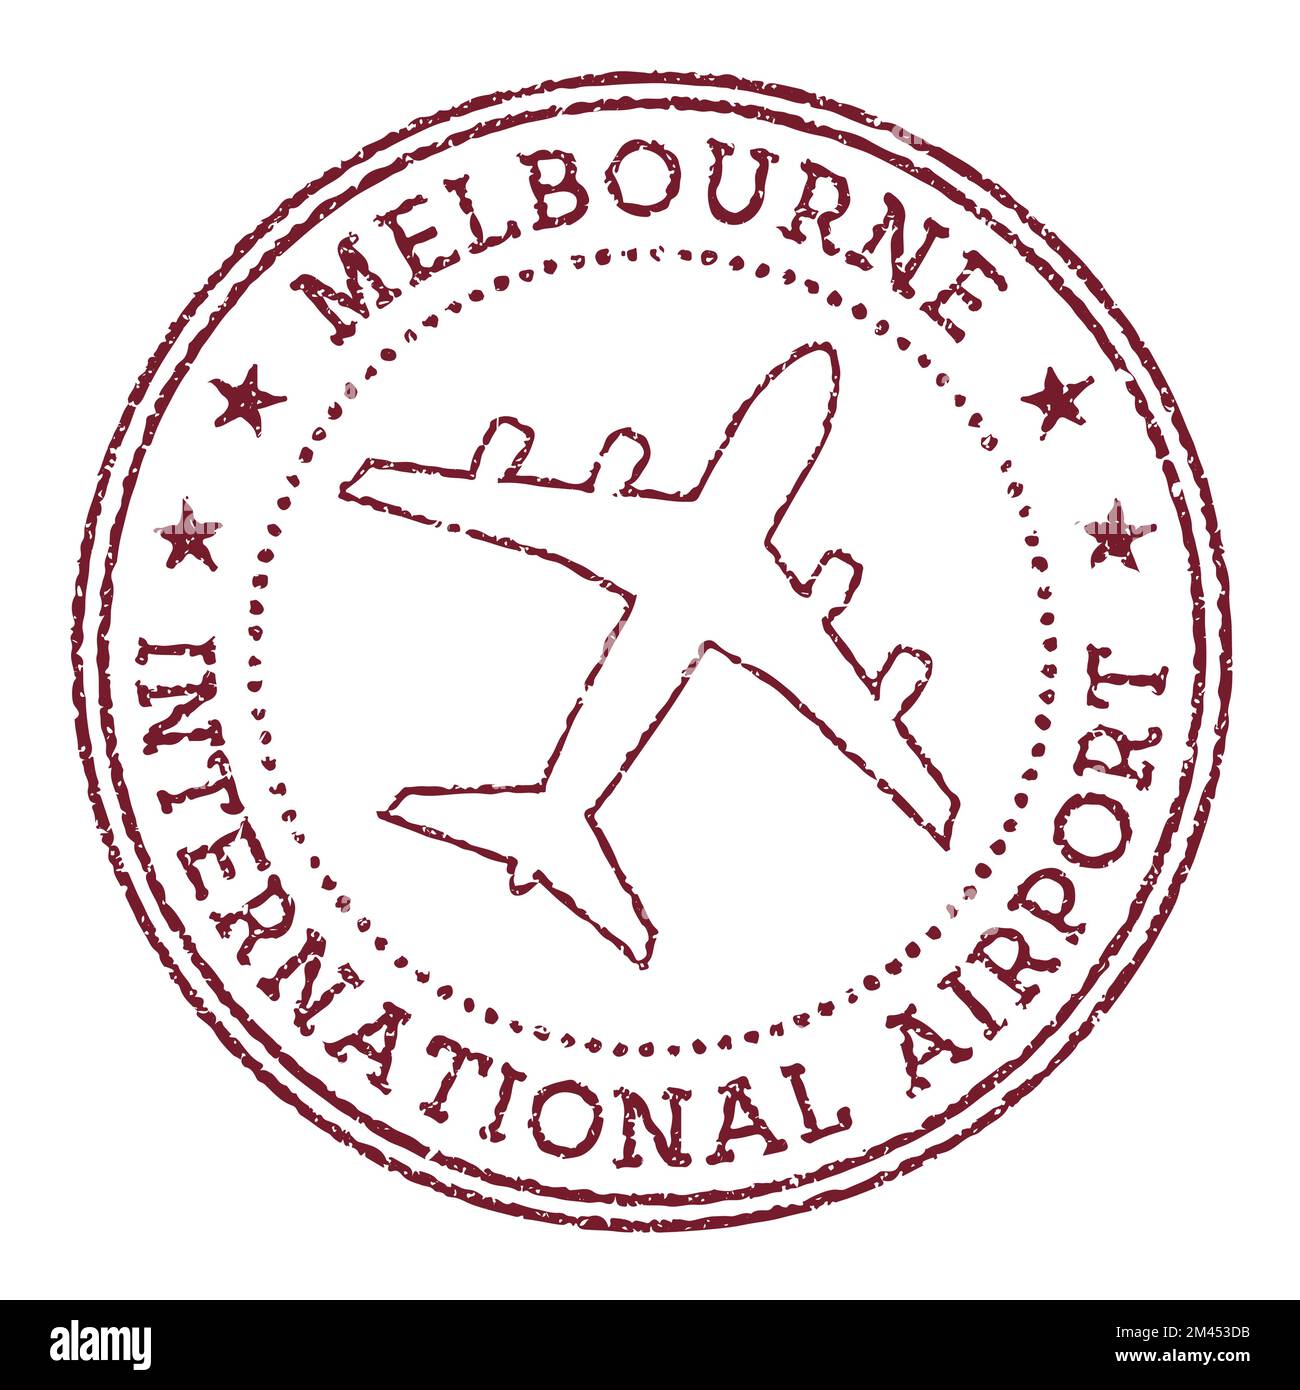 Melbourne International Airport stamp. Airport of Melbourne round logo. Vector illustration. Stock Vector